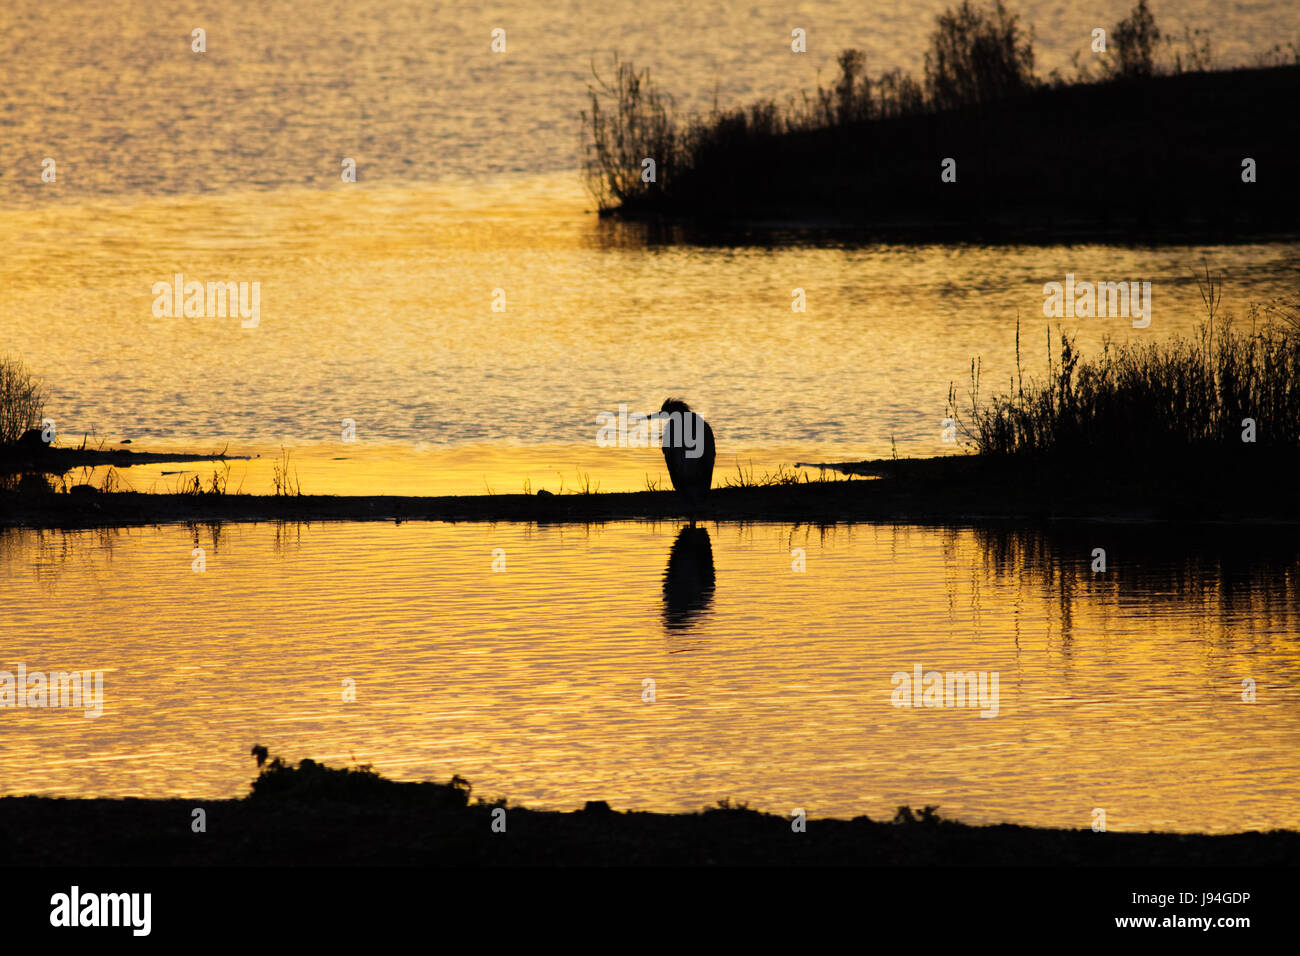 Silhouette of a Grey or Gray Heron (Ardea cinerea) in wetland wetlands environment at sunset Stock Photo